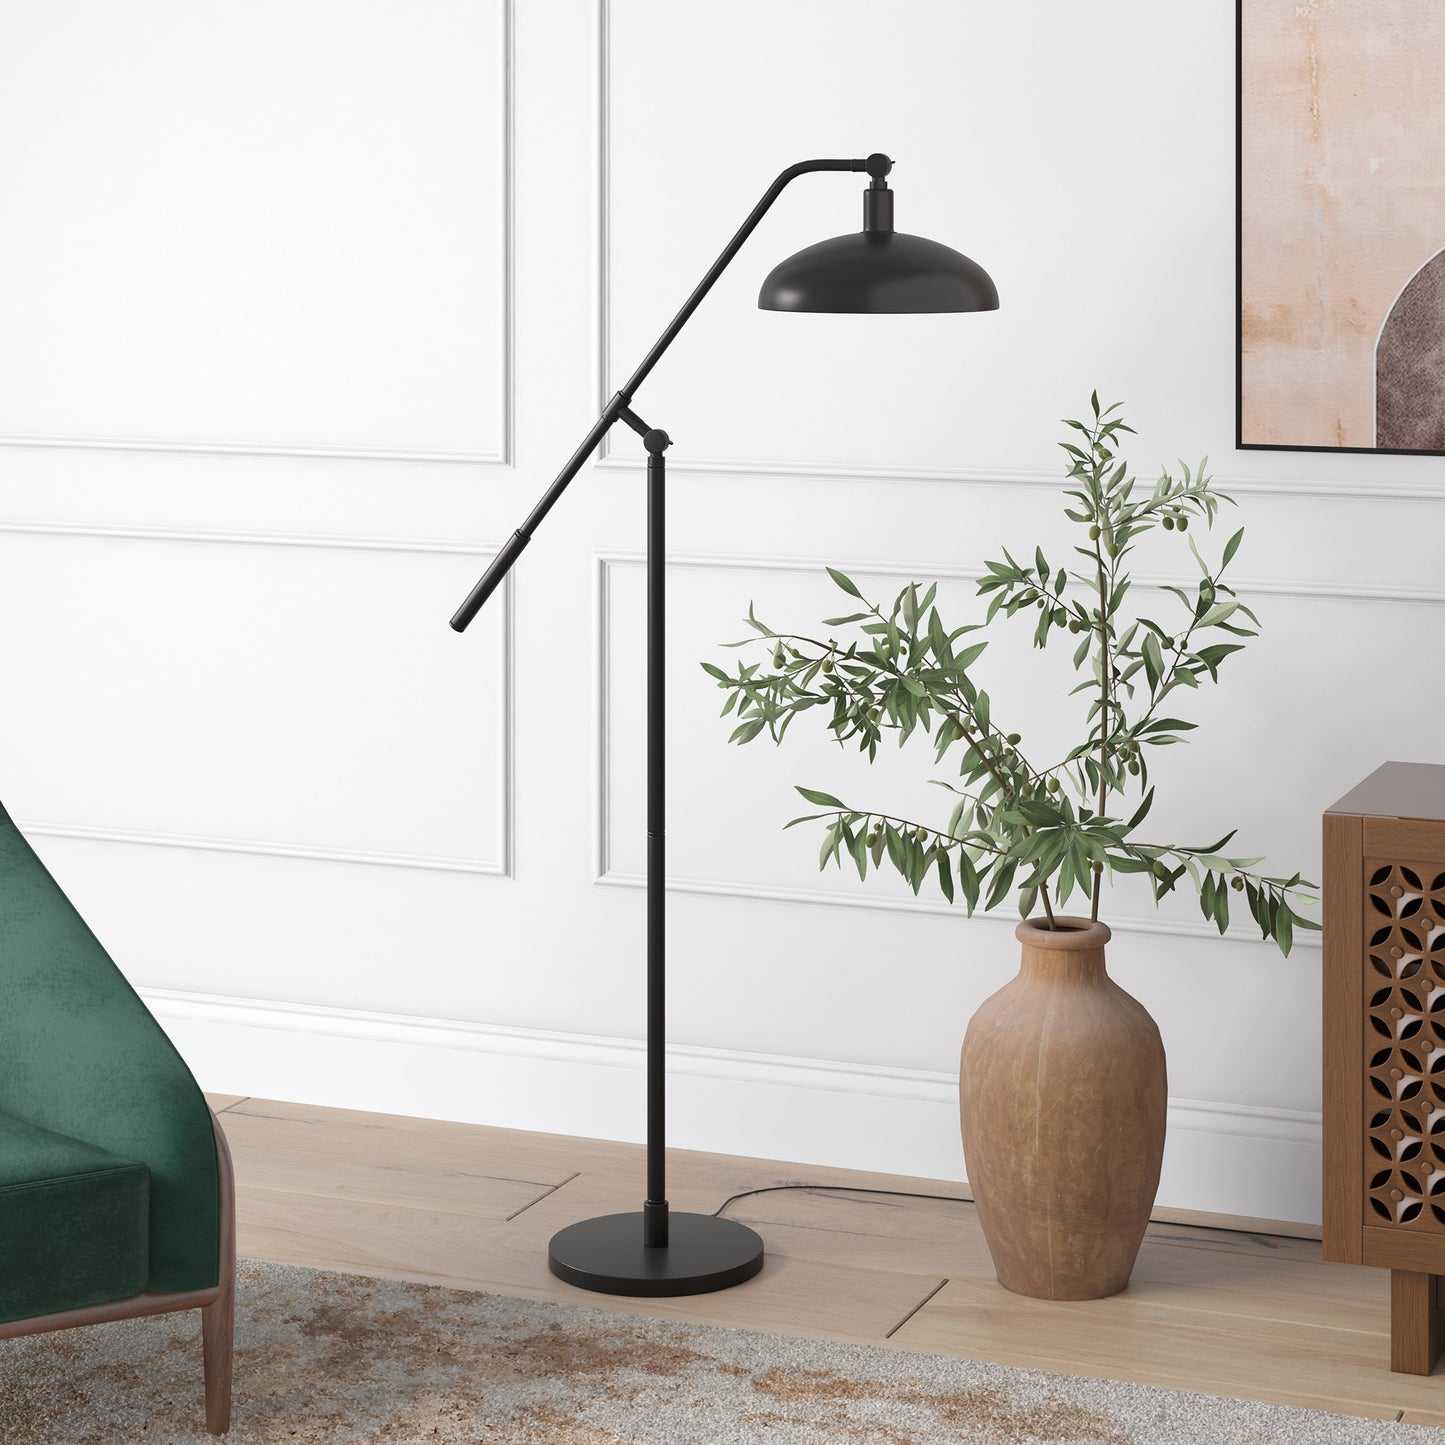 62" Black Reading Floor Lamp With Black Dome Shade